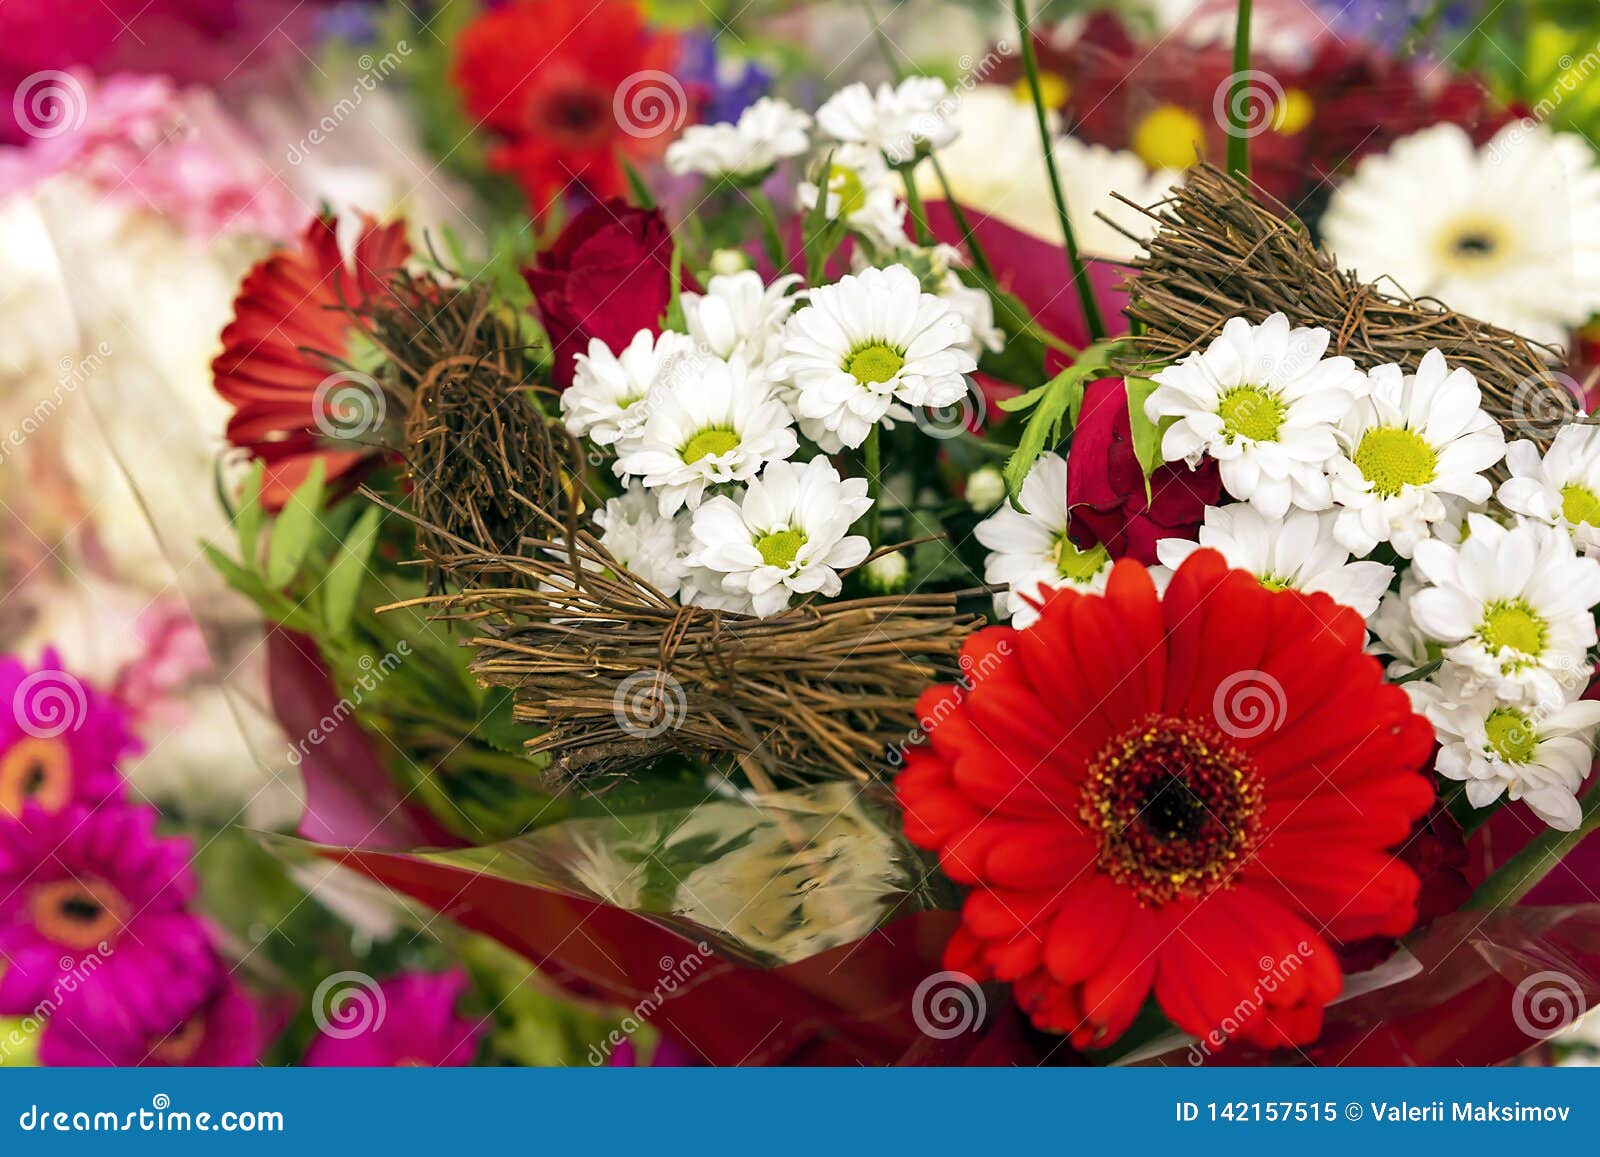 Flower Composition from Different Types of Flowers Stock Image ...